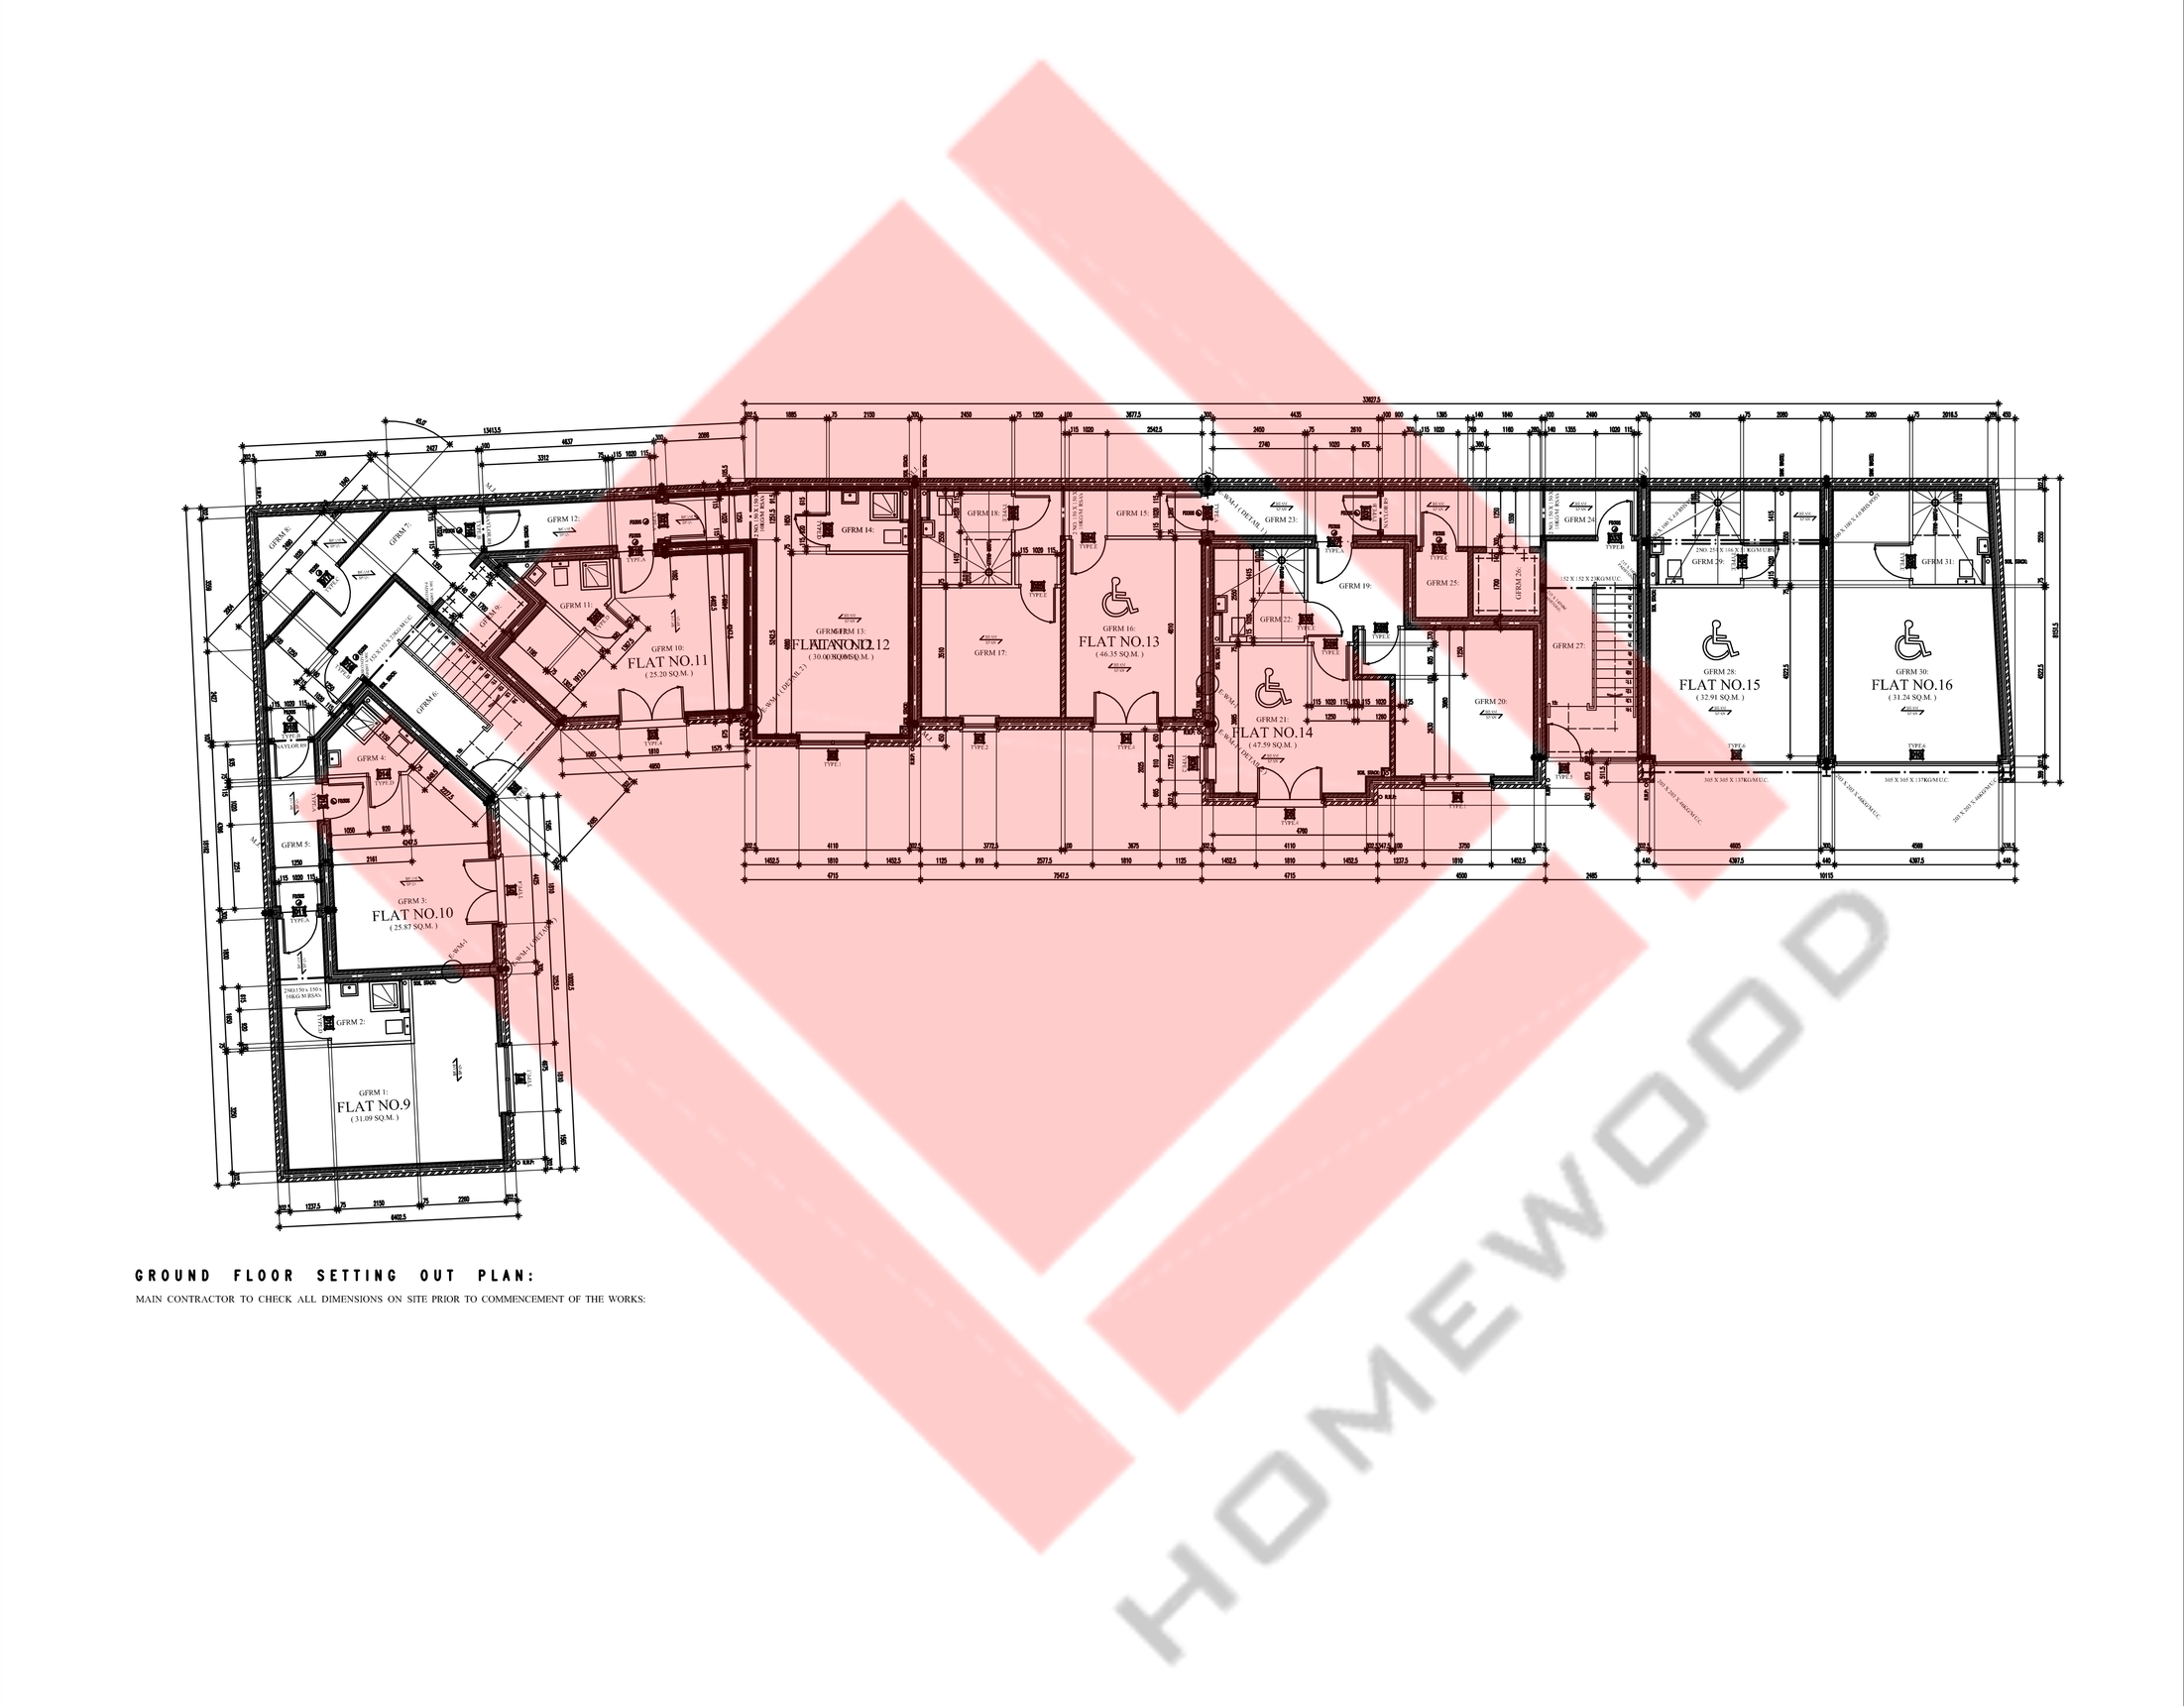 04 Floor Plan.Image.Marked_1.png